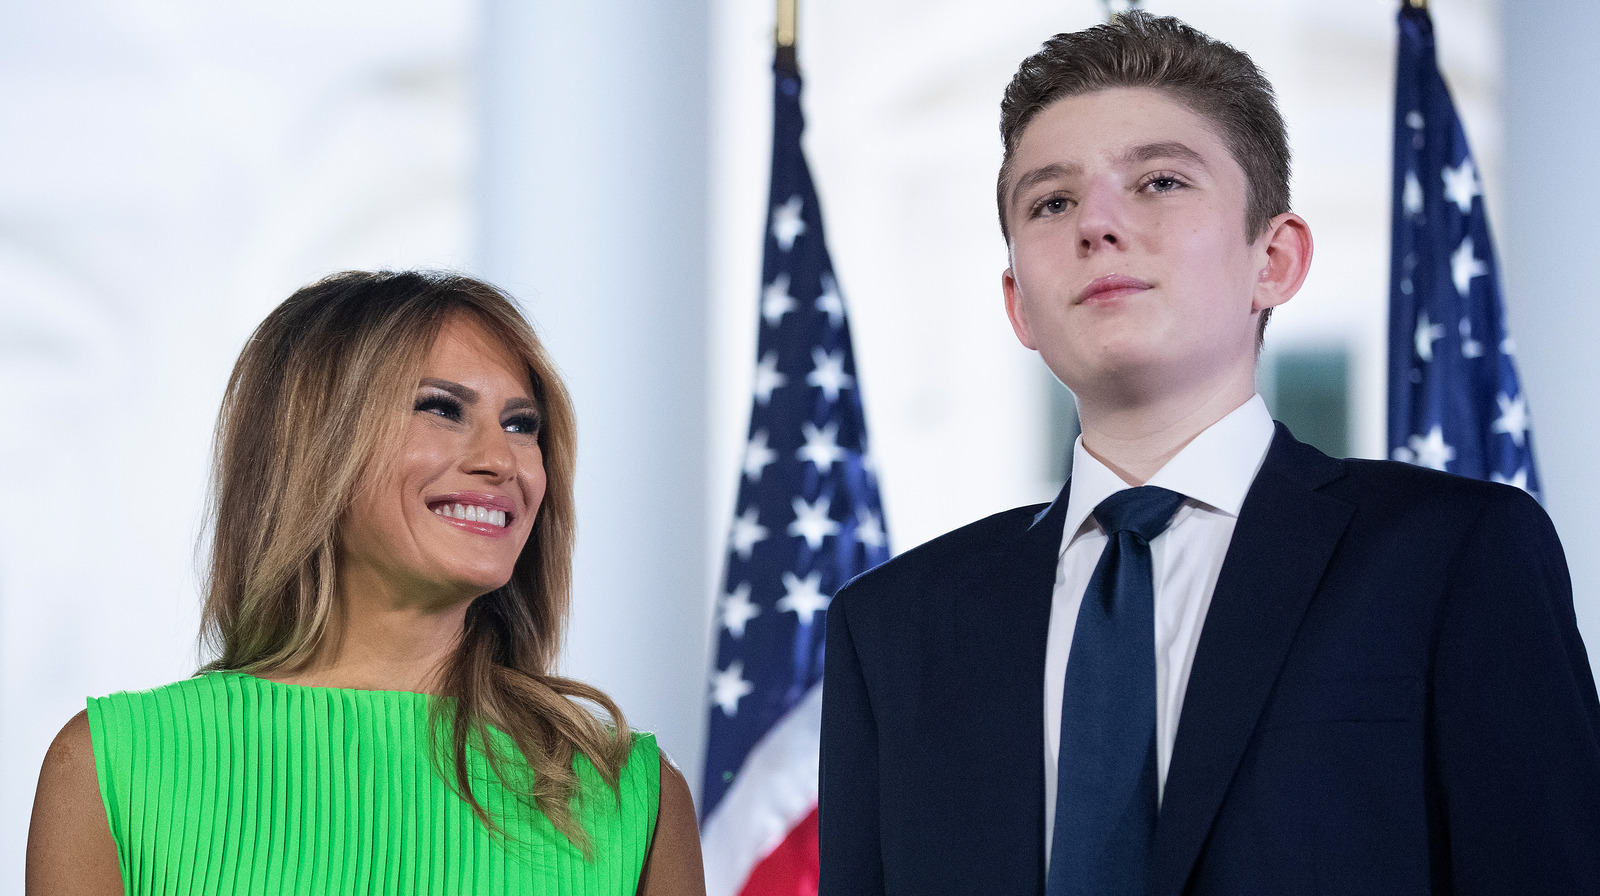 pr expert tells us barron trumps birthday criticism is taste of whats to come for 18 year old